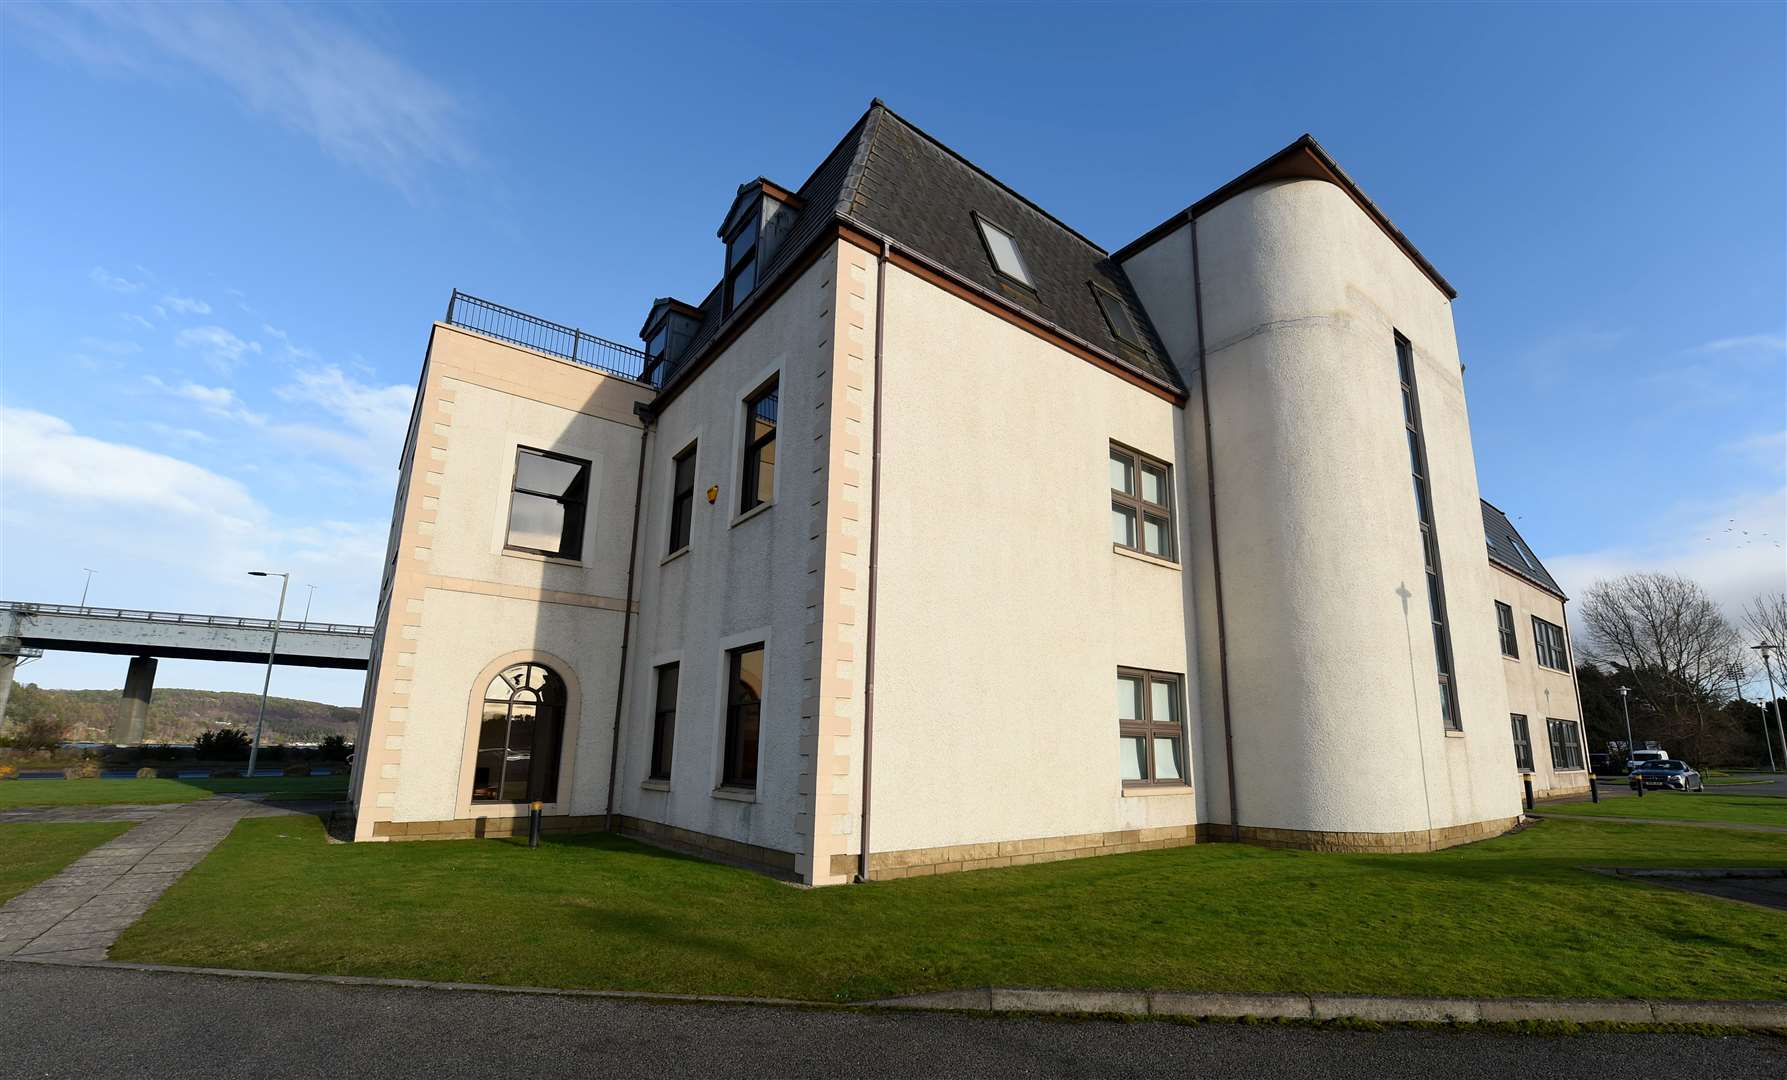 Hial wants to centralise air traffic control operations at New Century House in Inverness.